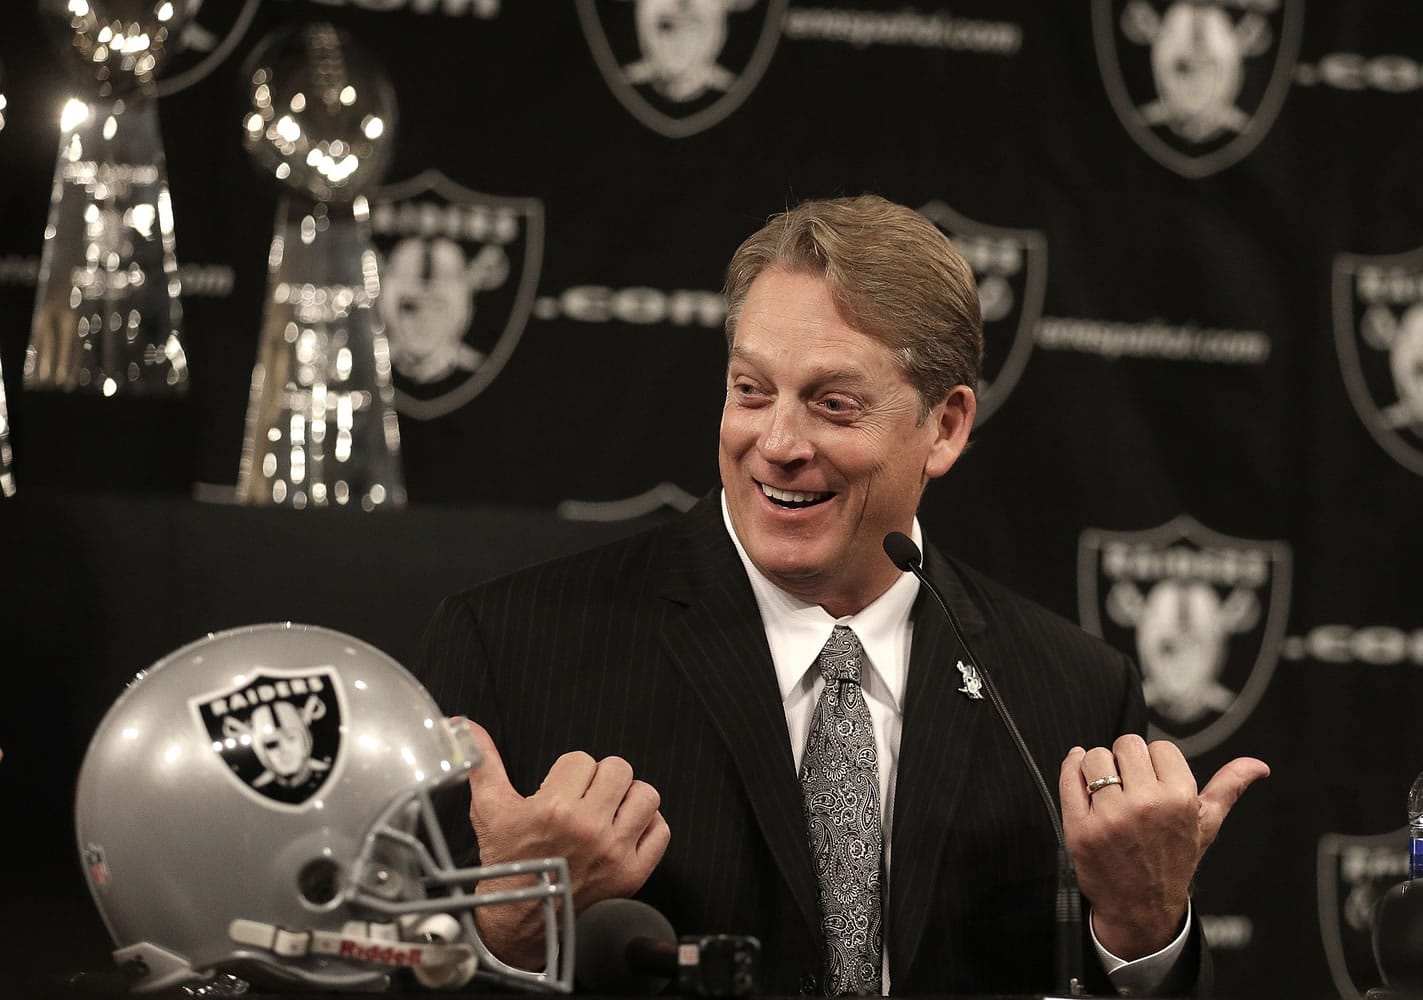 New Oakland Raiders coach Jack Del Rio gestures during a news conference Friday, Jan. 16, 2015, in Alameda, Calif.